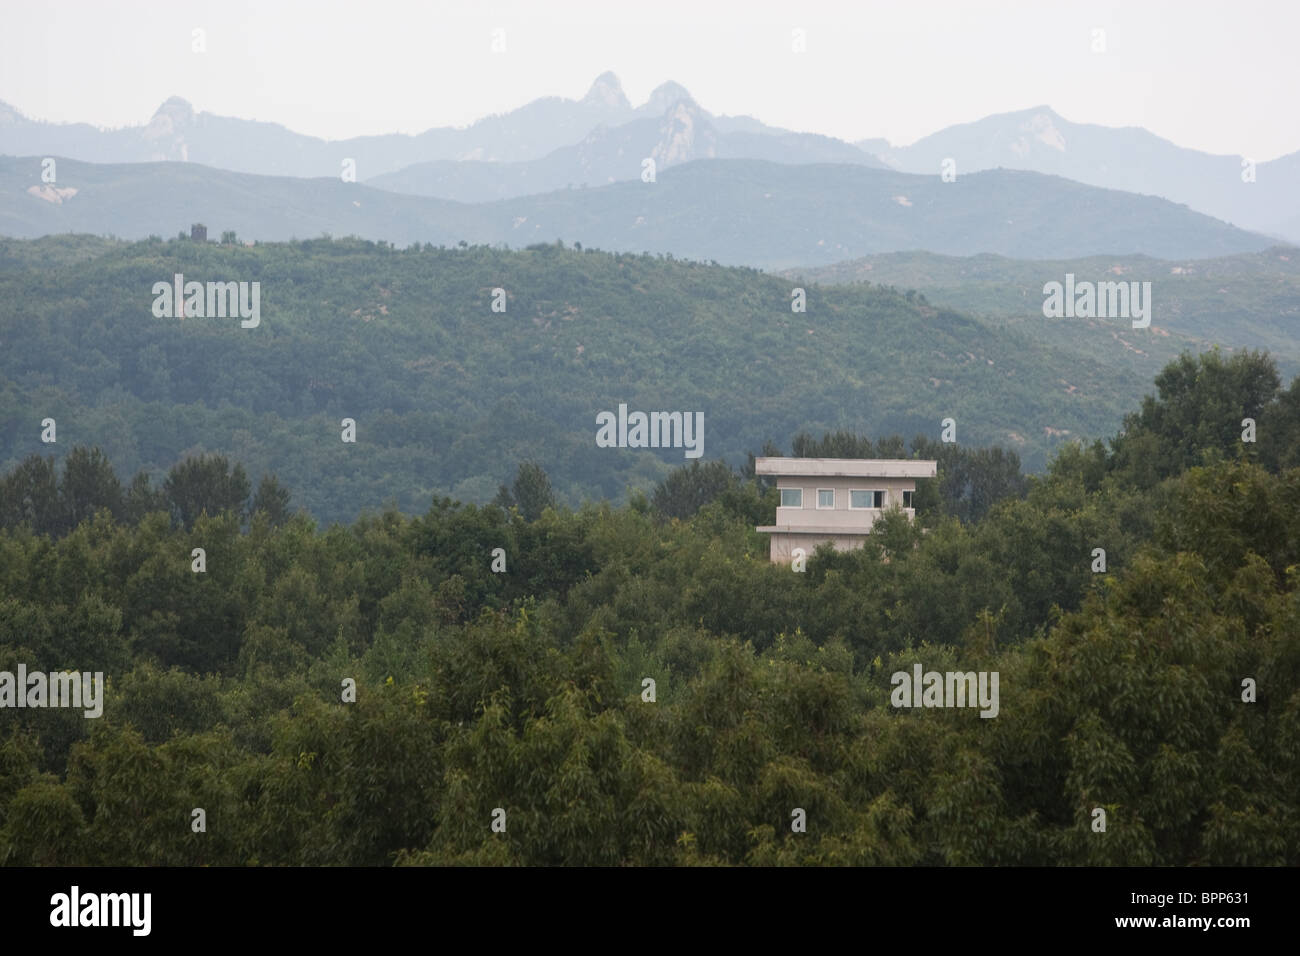 North Korean watchtower in the Demilitarized zone (DMZ) between South and North Korea. Stock Photo